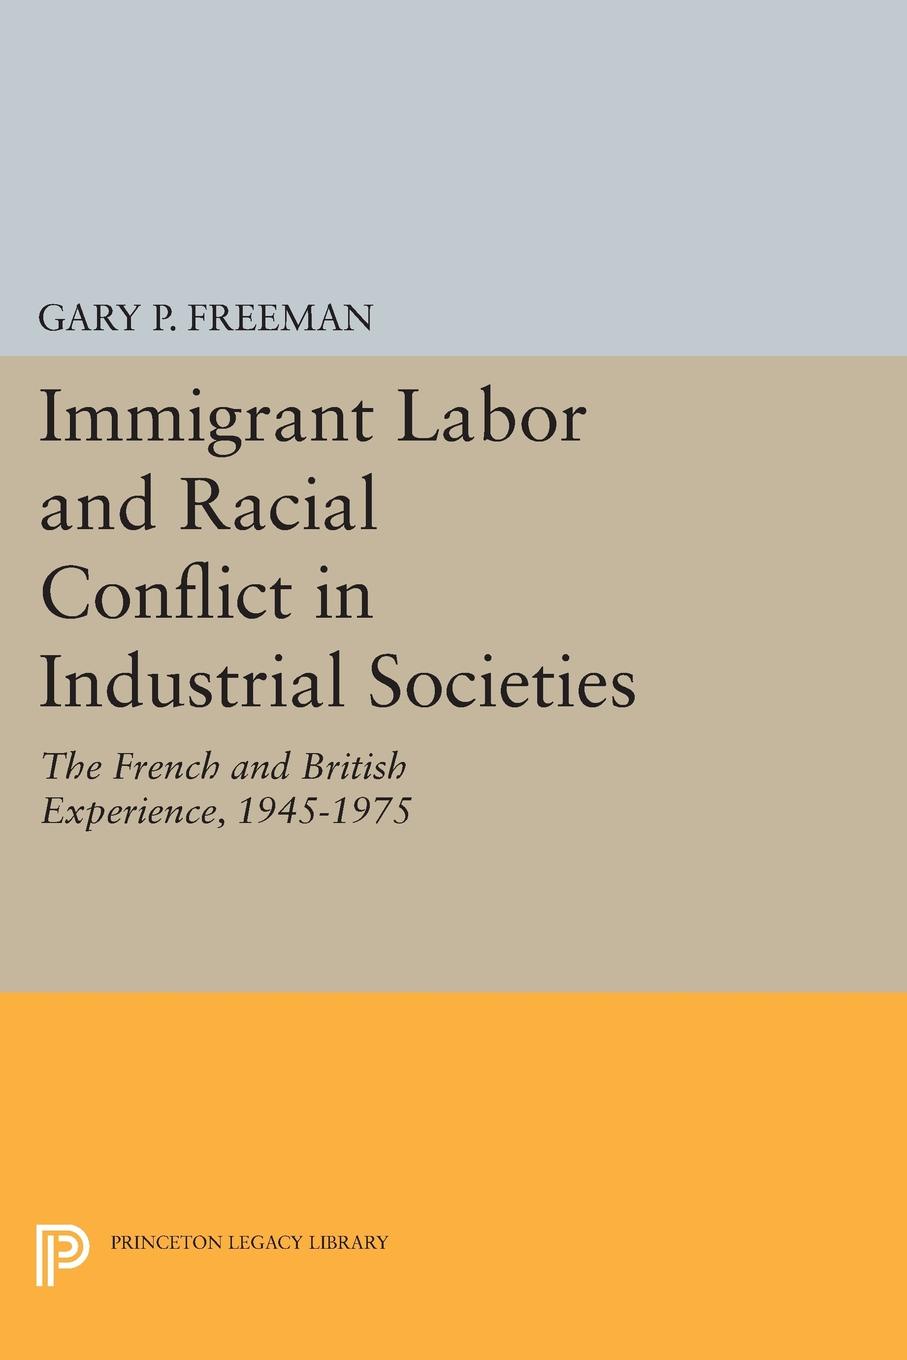 Immigrant Labor and Racial Conflict in Industrial Societies. The French and British Experience, 1945-1975